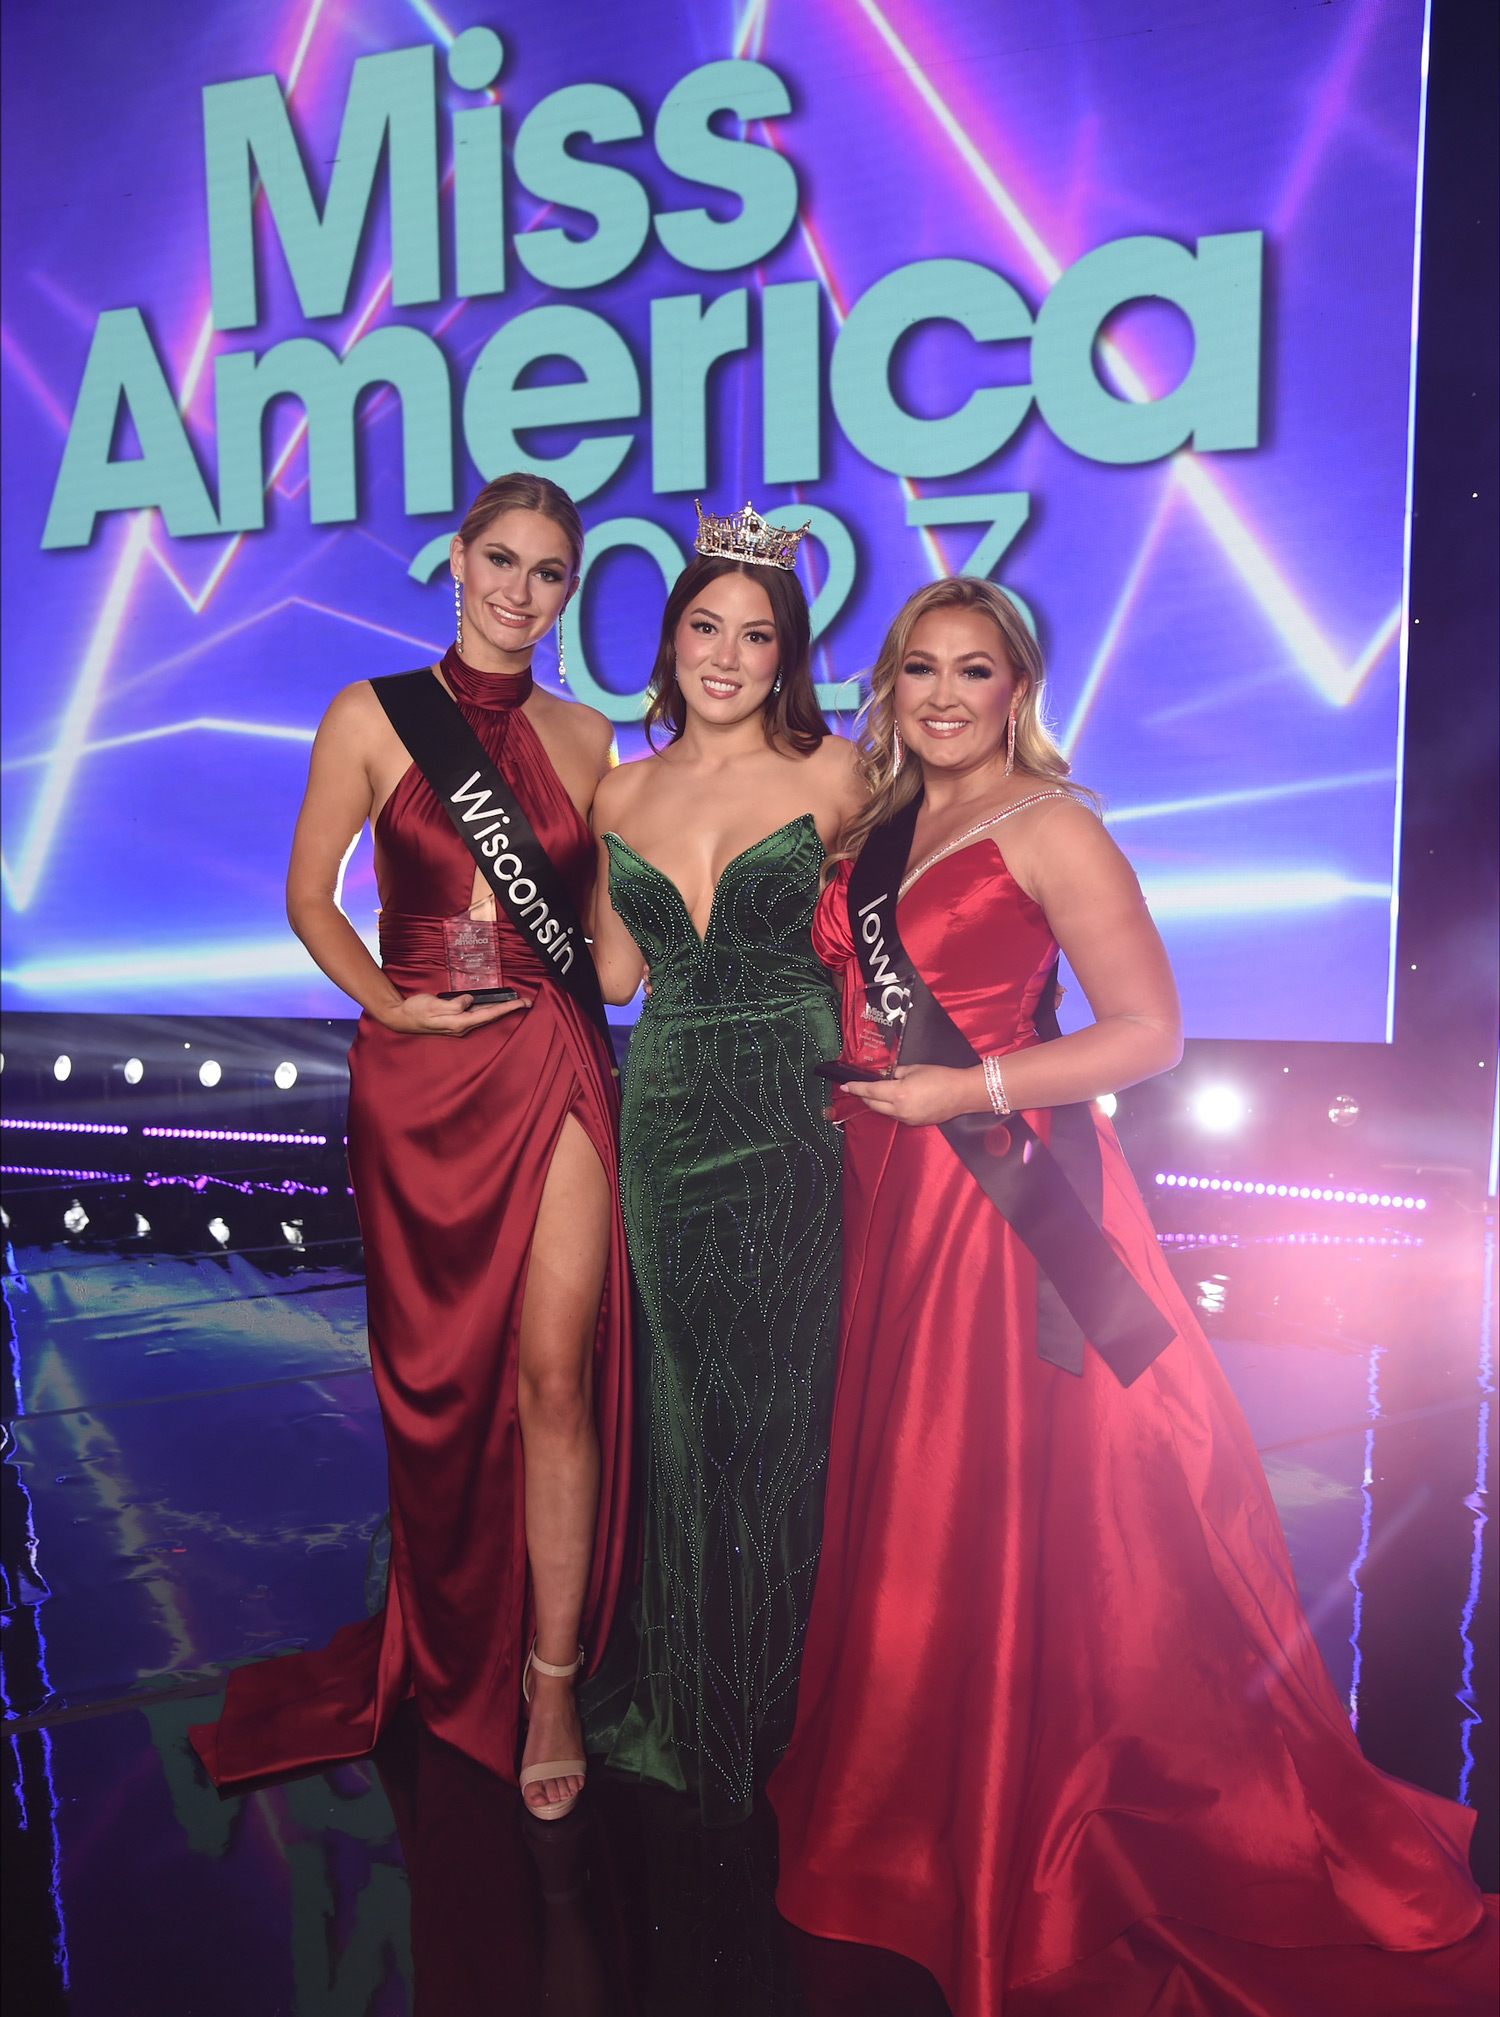 Miss America 2023 Preliminary Night 2 Winners Miss Iowa and Miss Wisconsin pose on stage with Miss America 2022, Emma Broyles